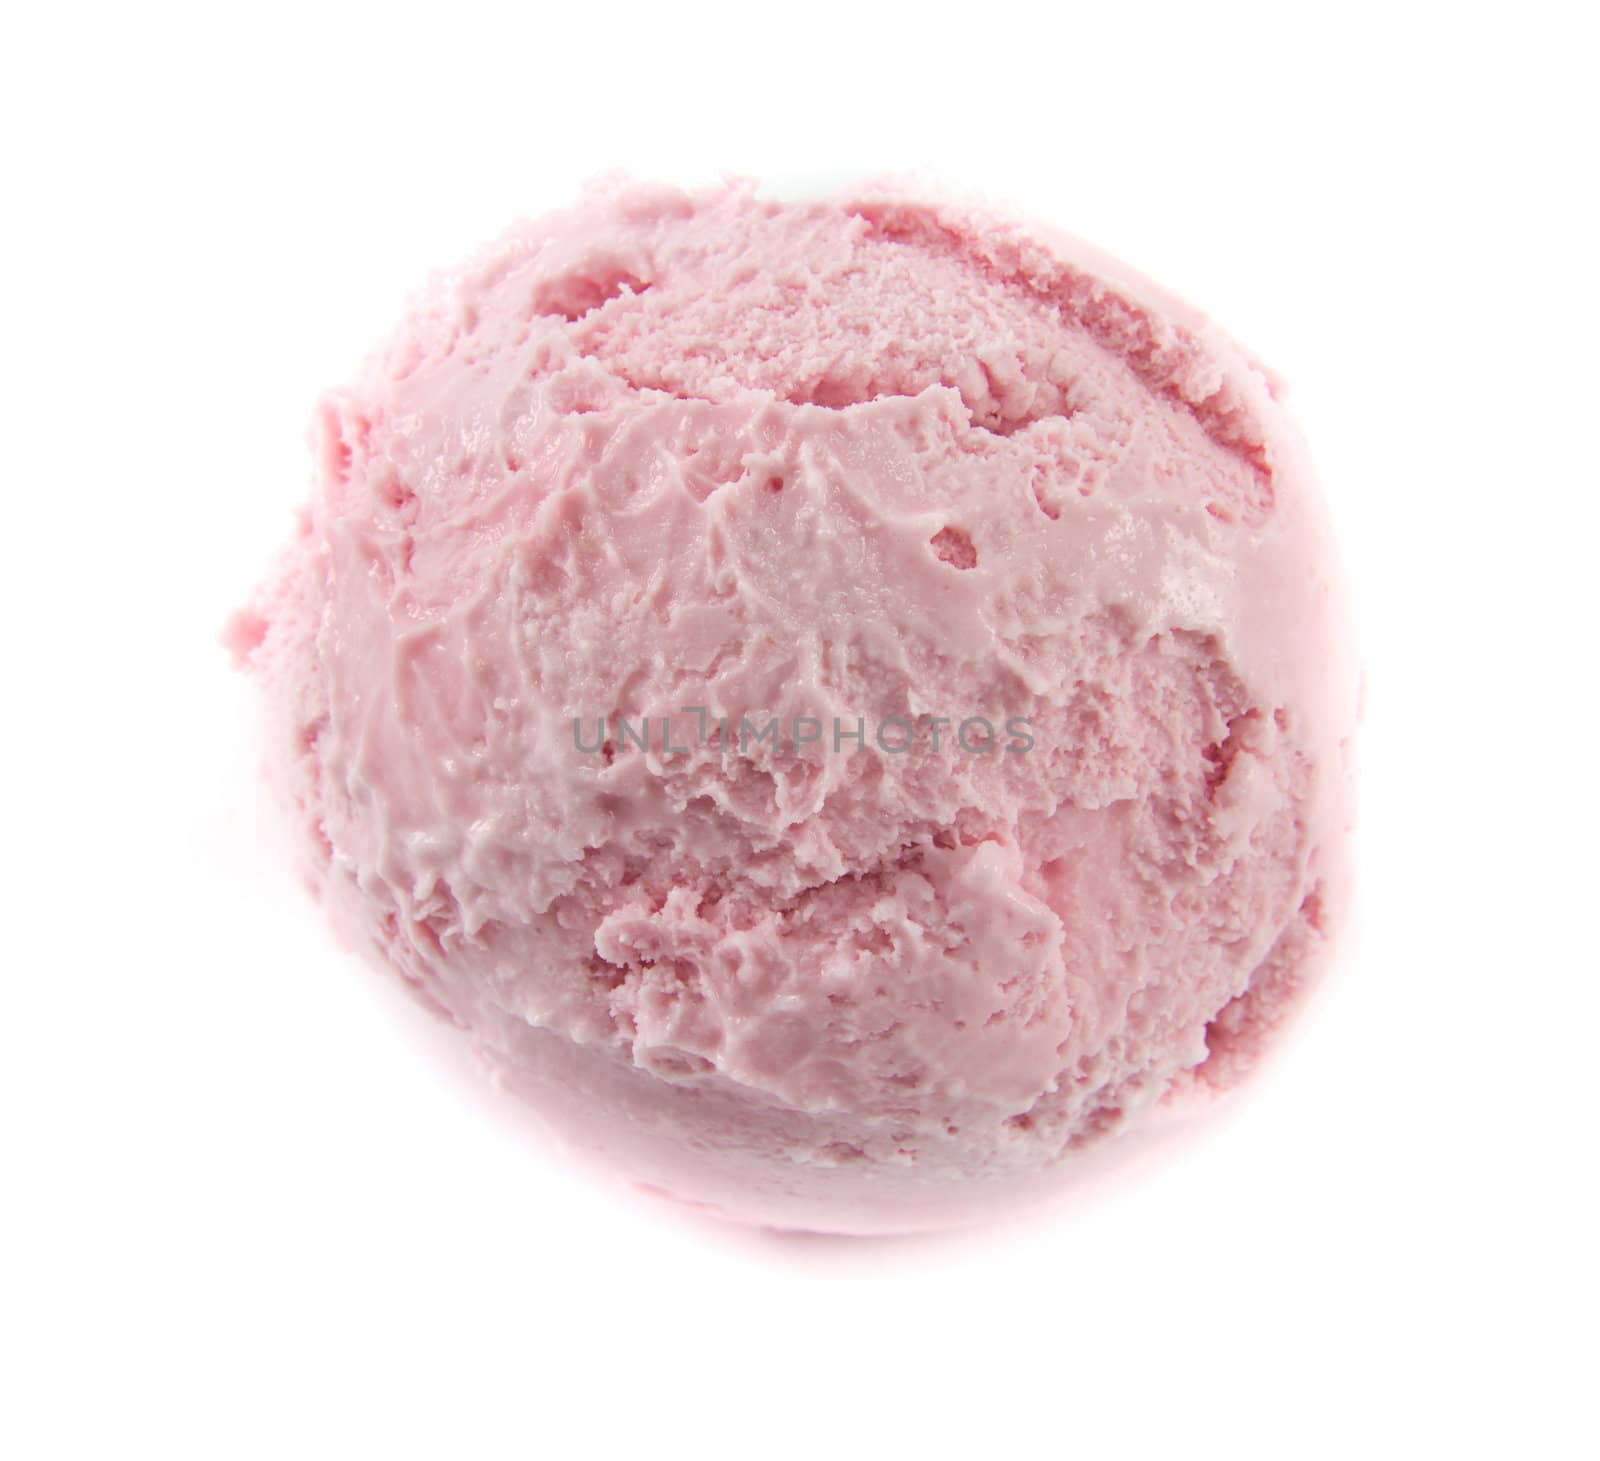 Picture of a a cold strawberry icecream ball